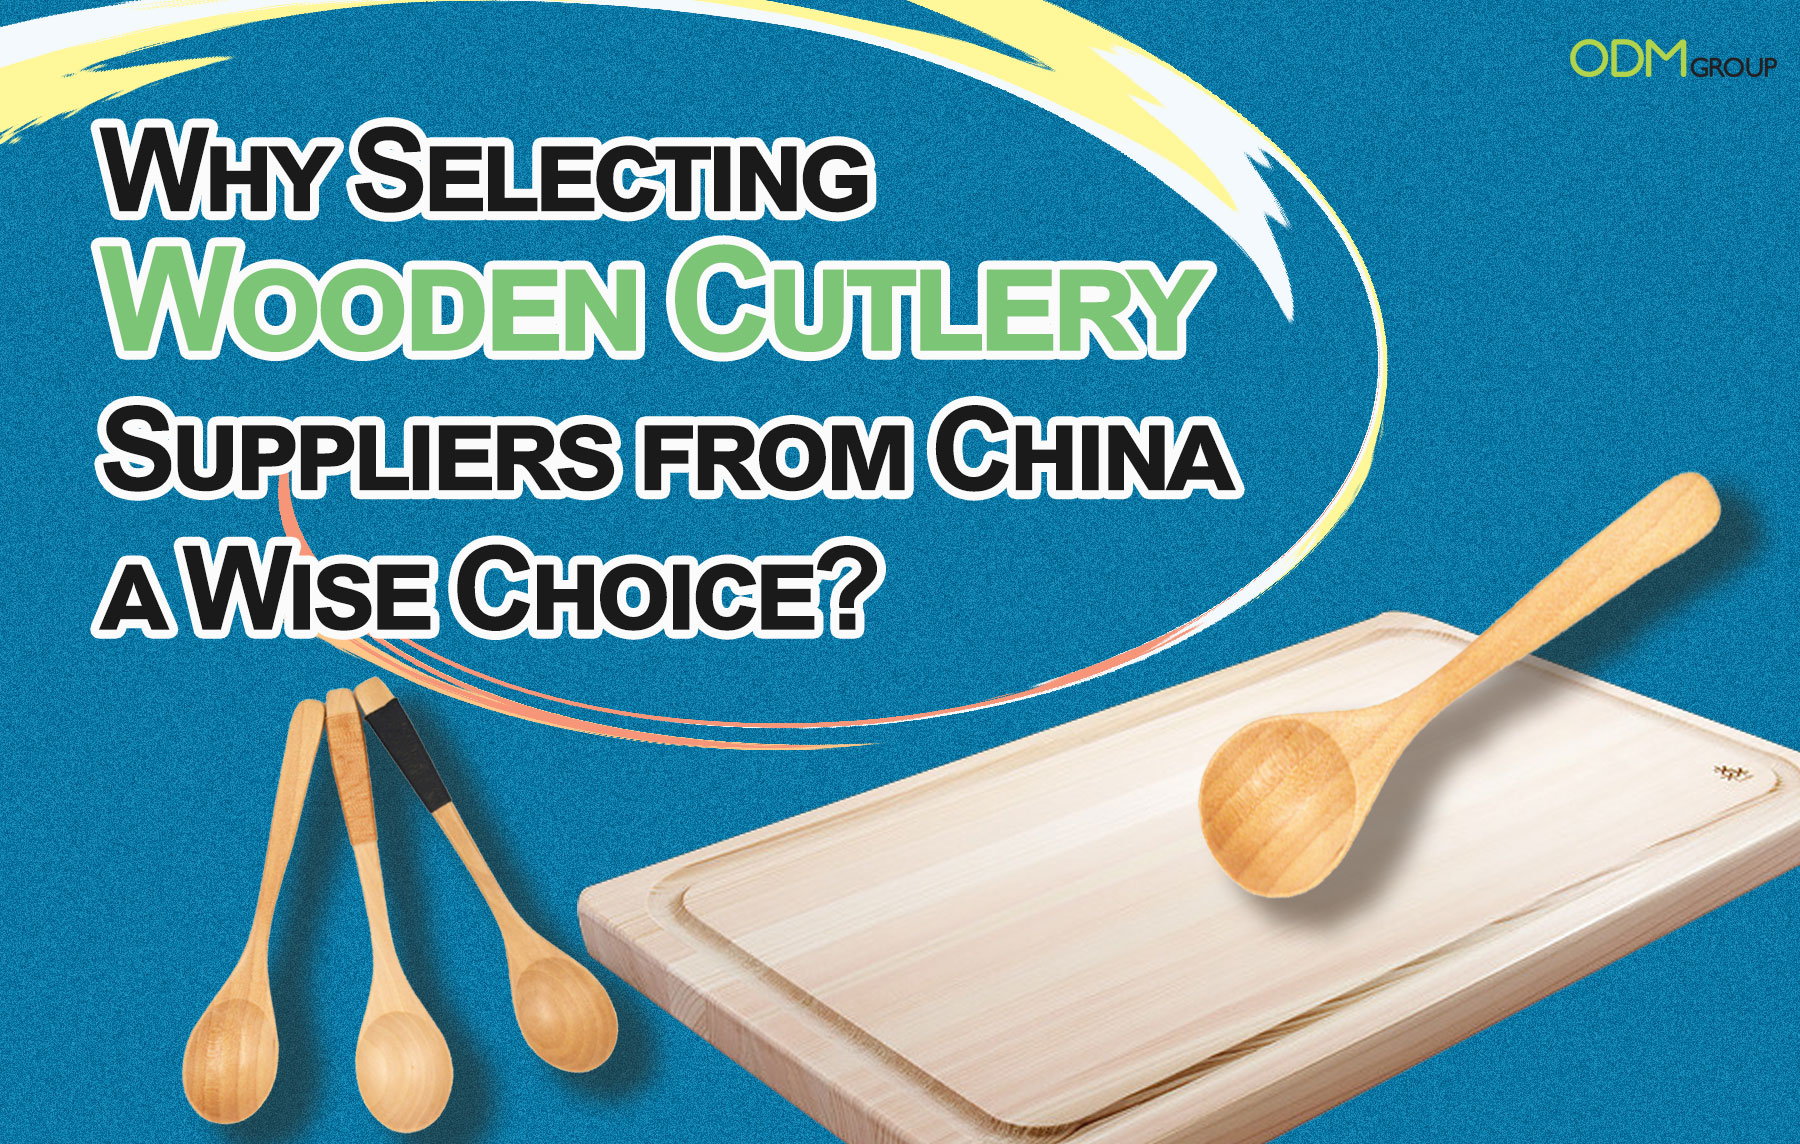 Wooden Cutlery Suppliers